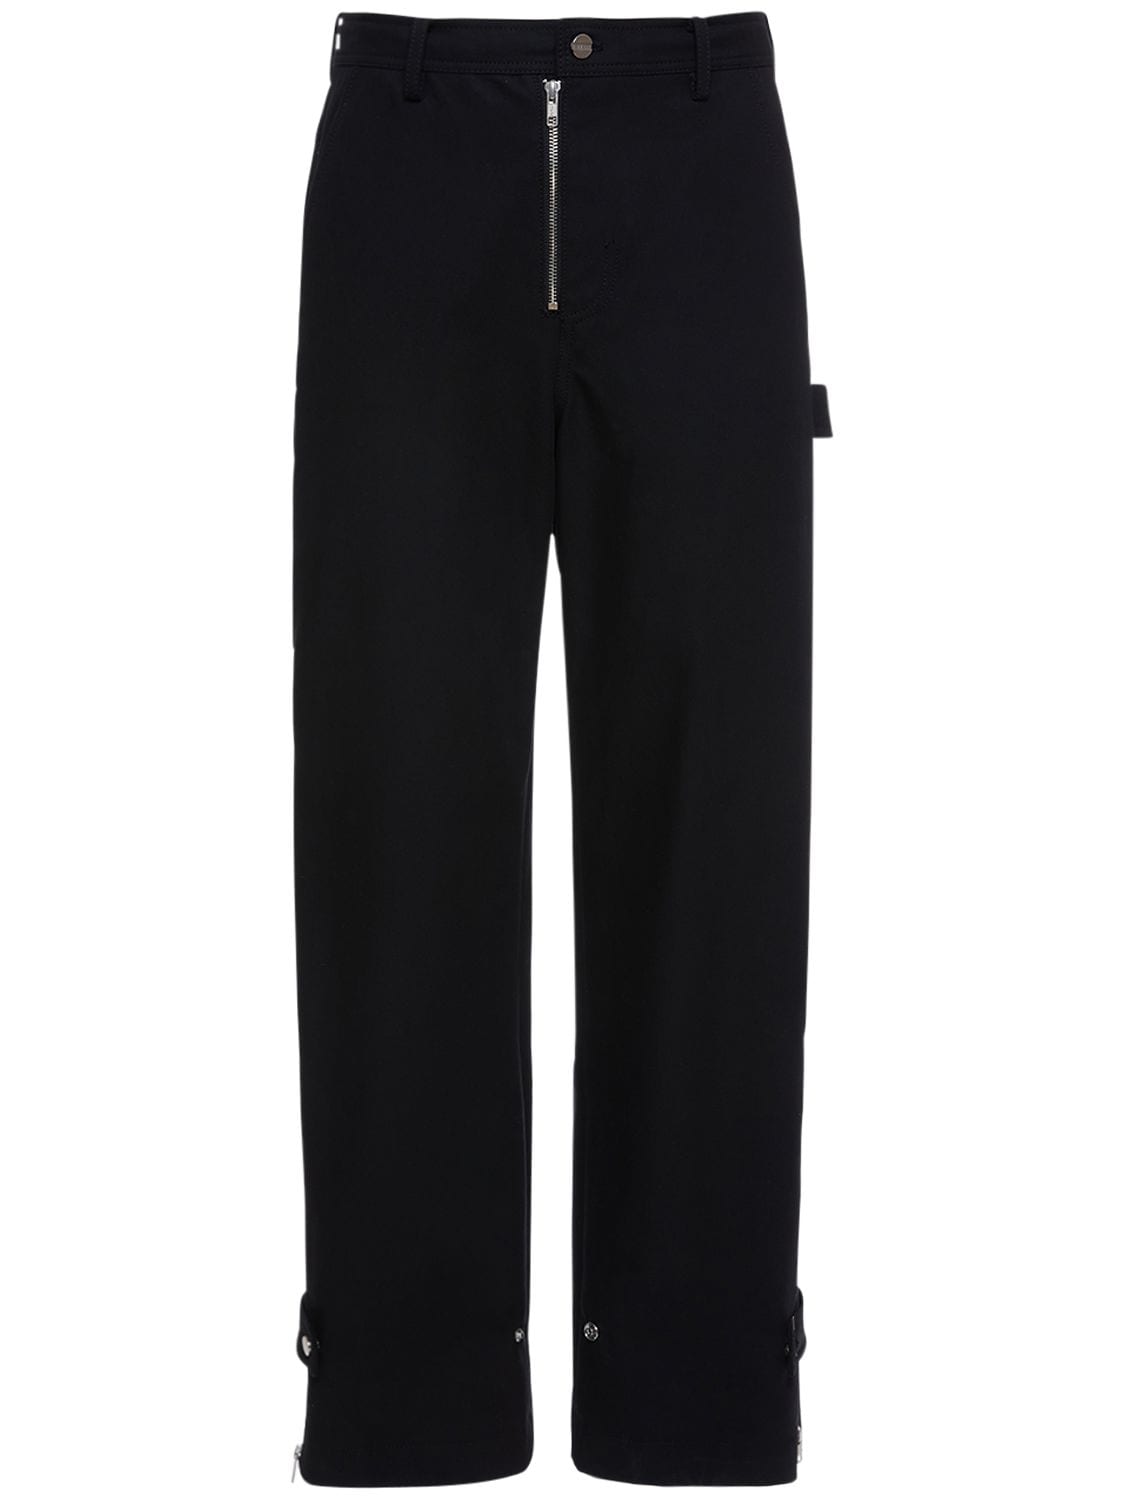 DION LEE Utility Cotton Twill Pants